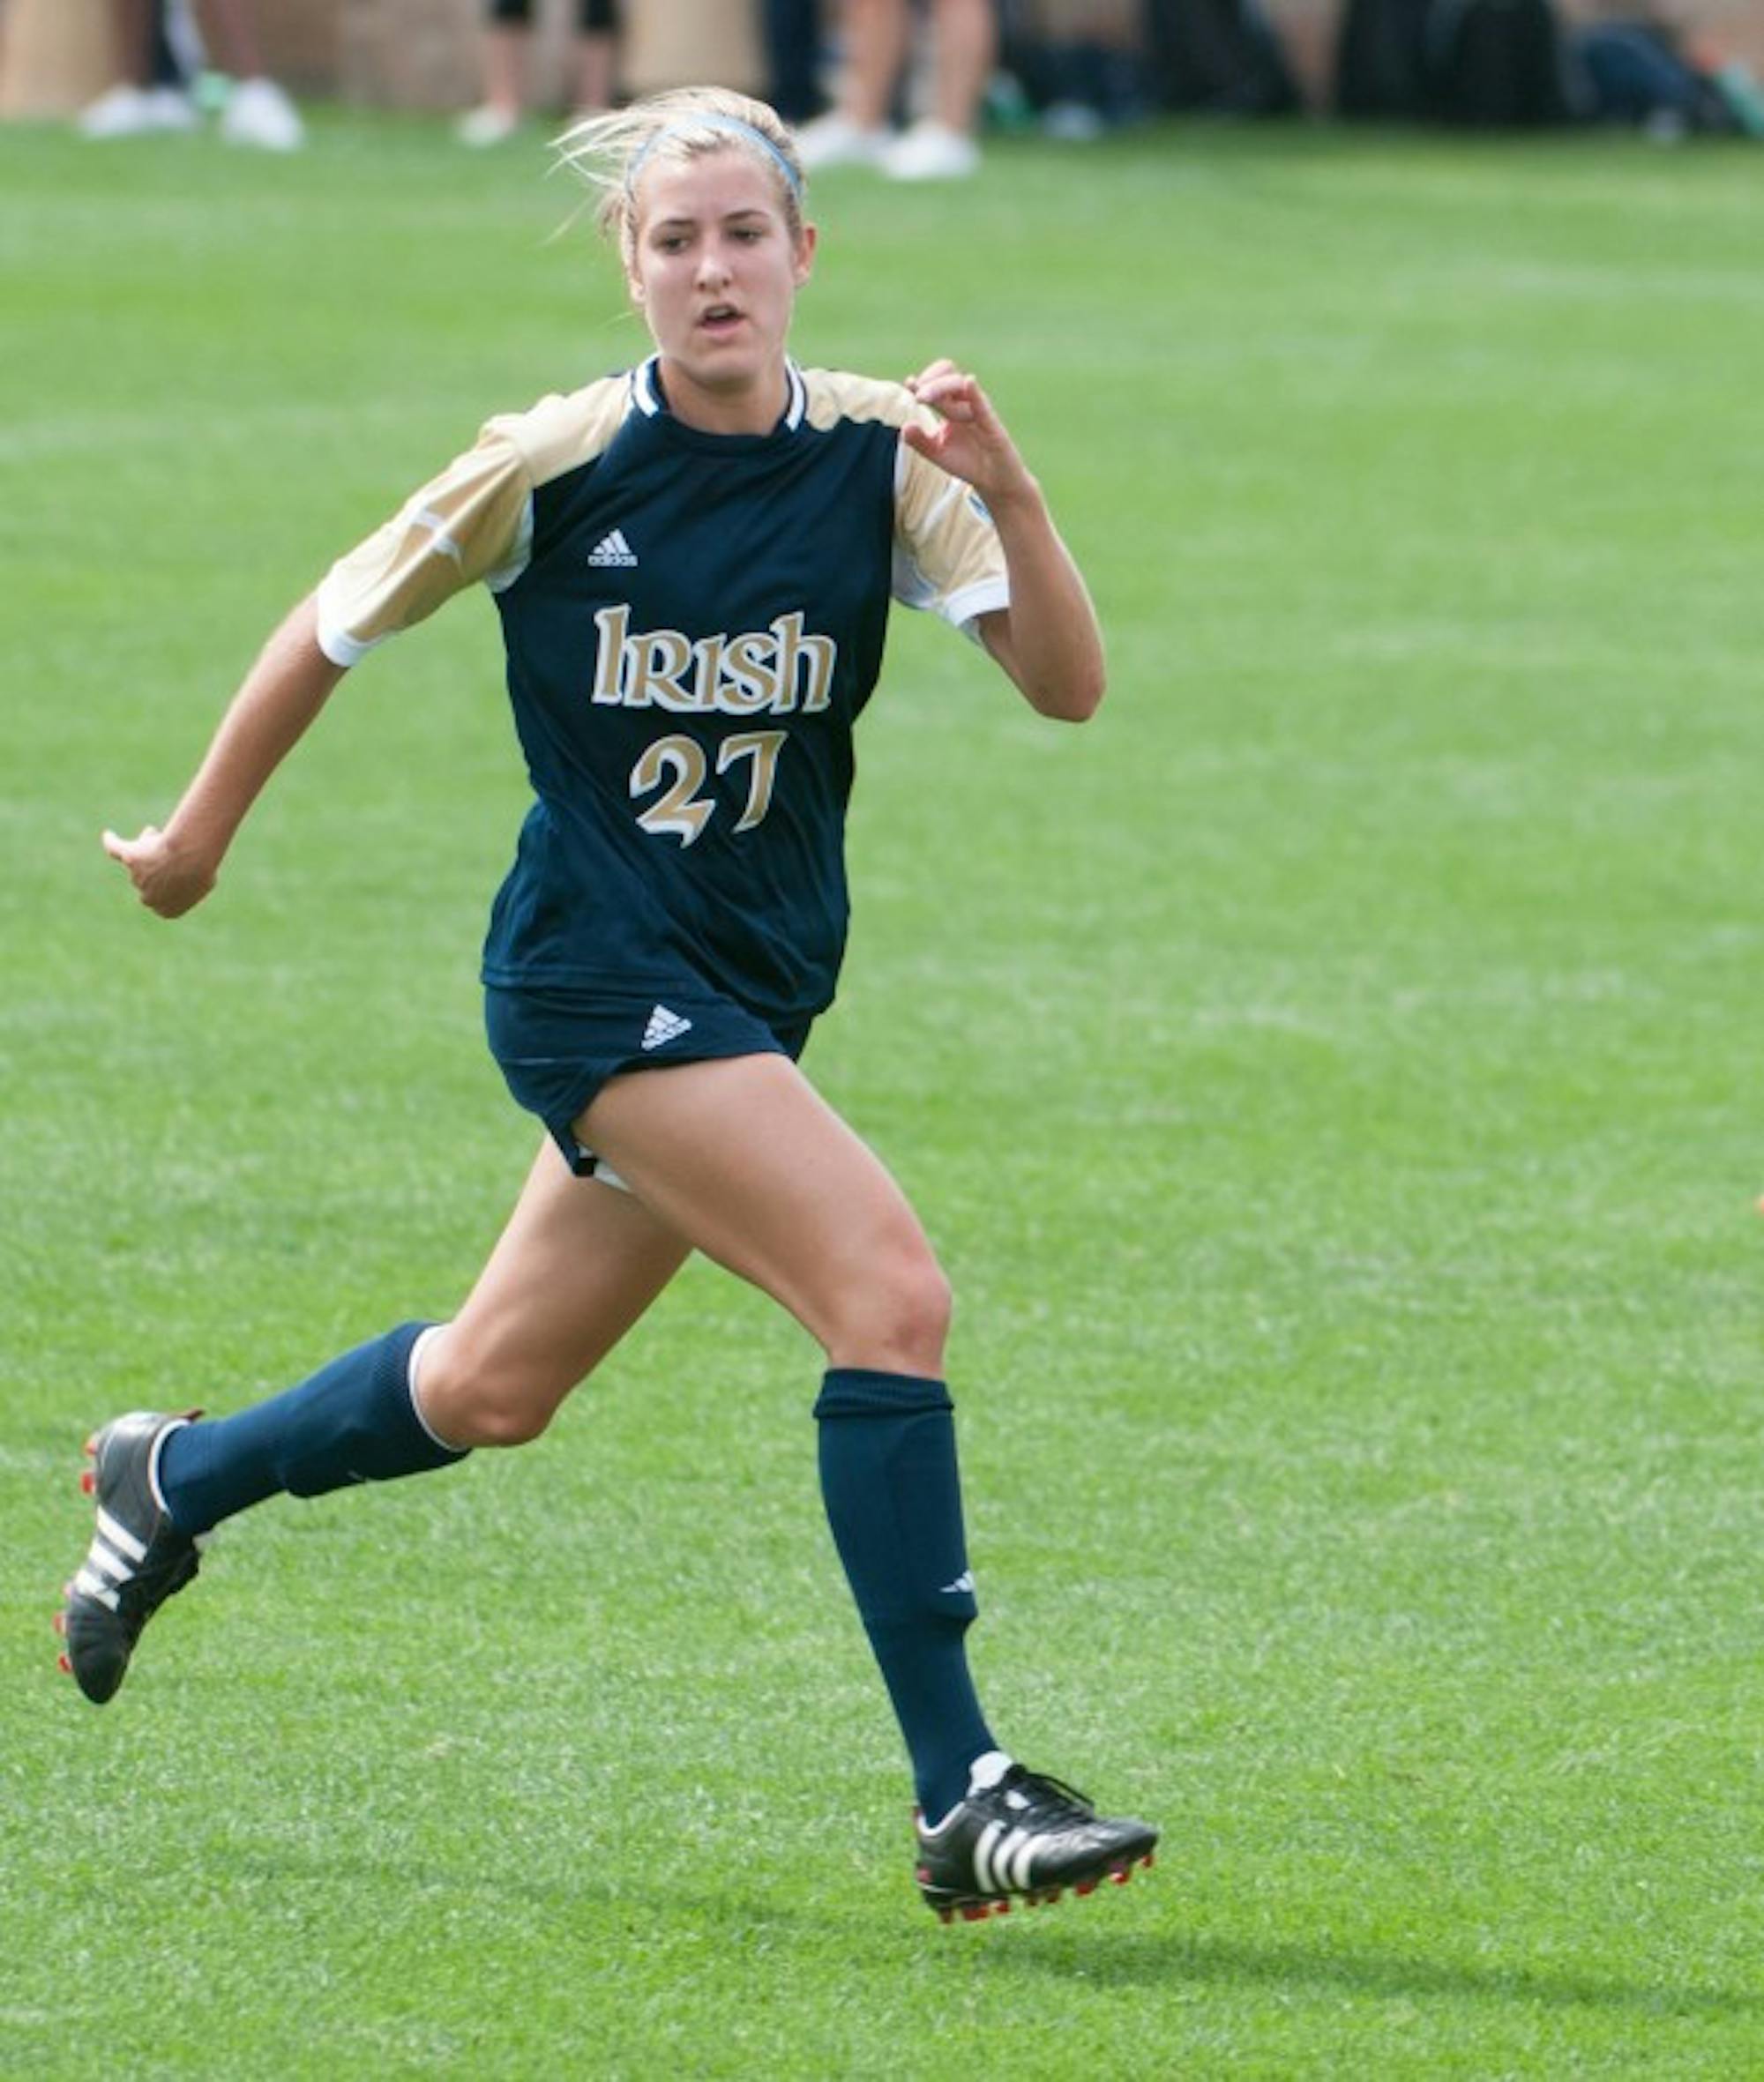 Irish sophomore forward Kaleigh Olmsted sprints up the pitch against UCLA on Sept. 1, 2013 at Alumni Stadium. Olmsted registered her first point this season Sunday with an assist against Toledo.